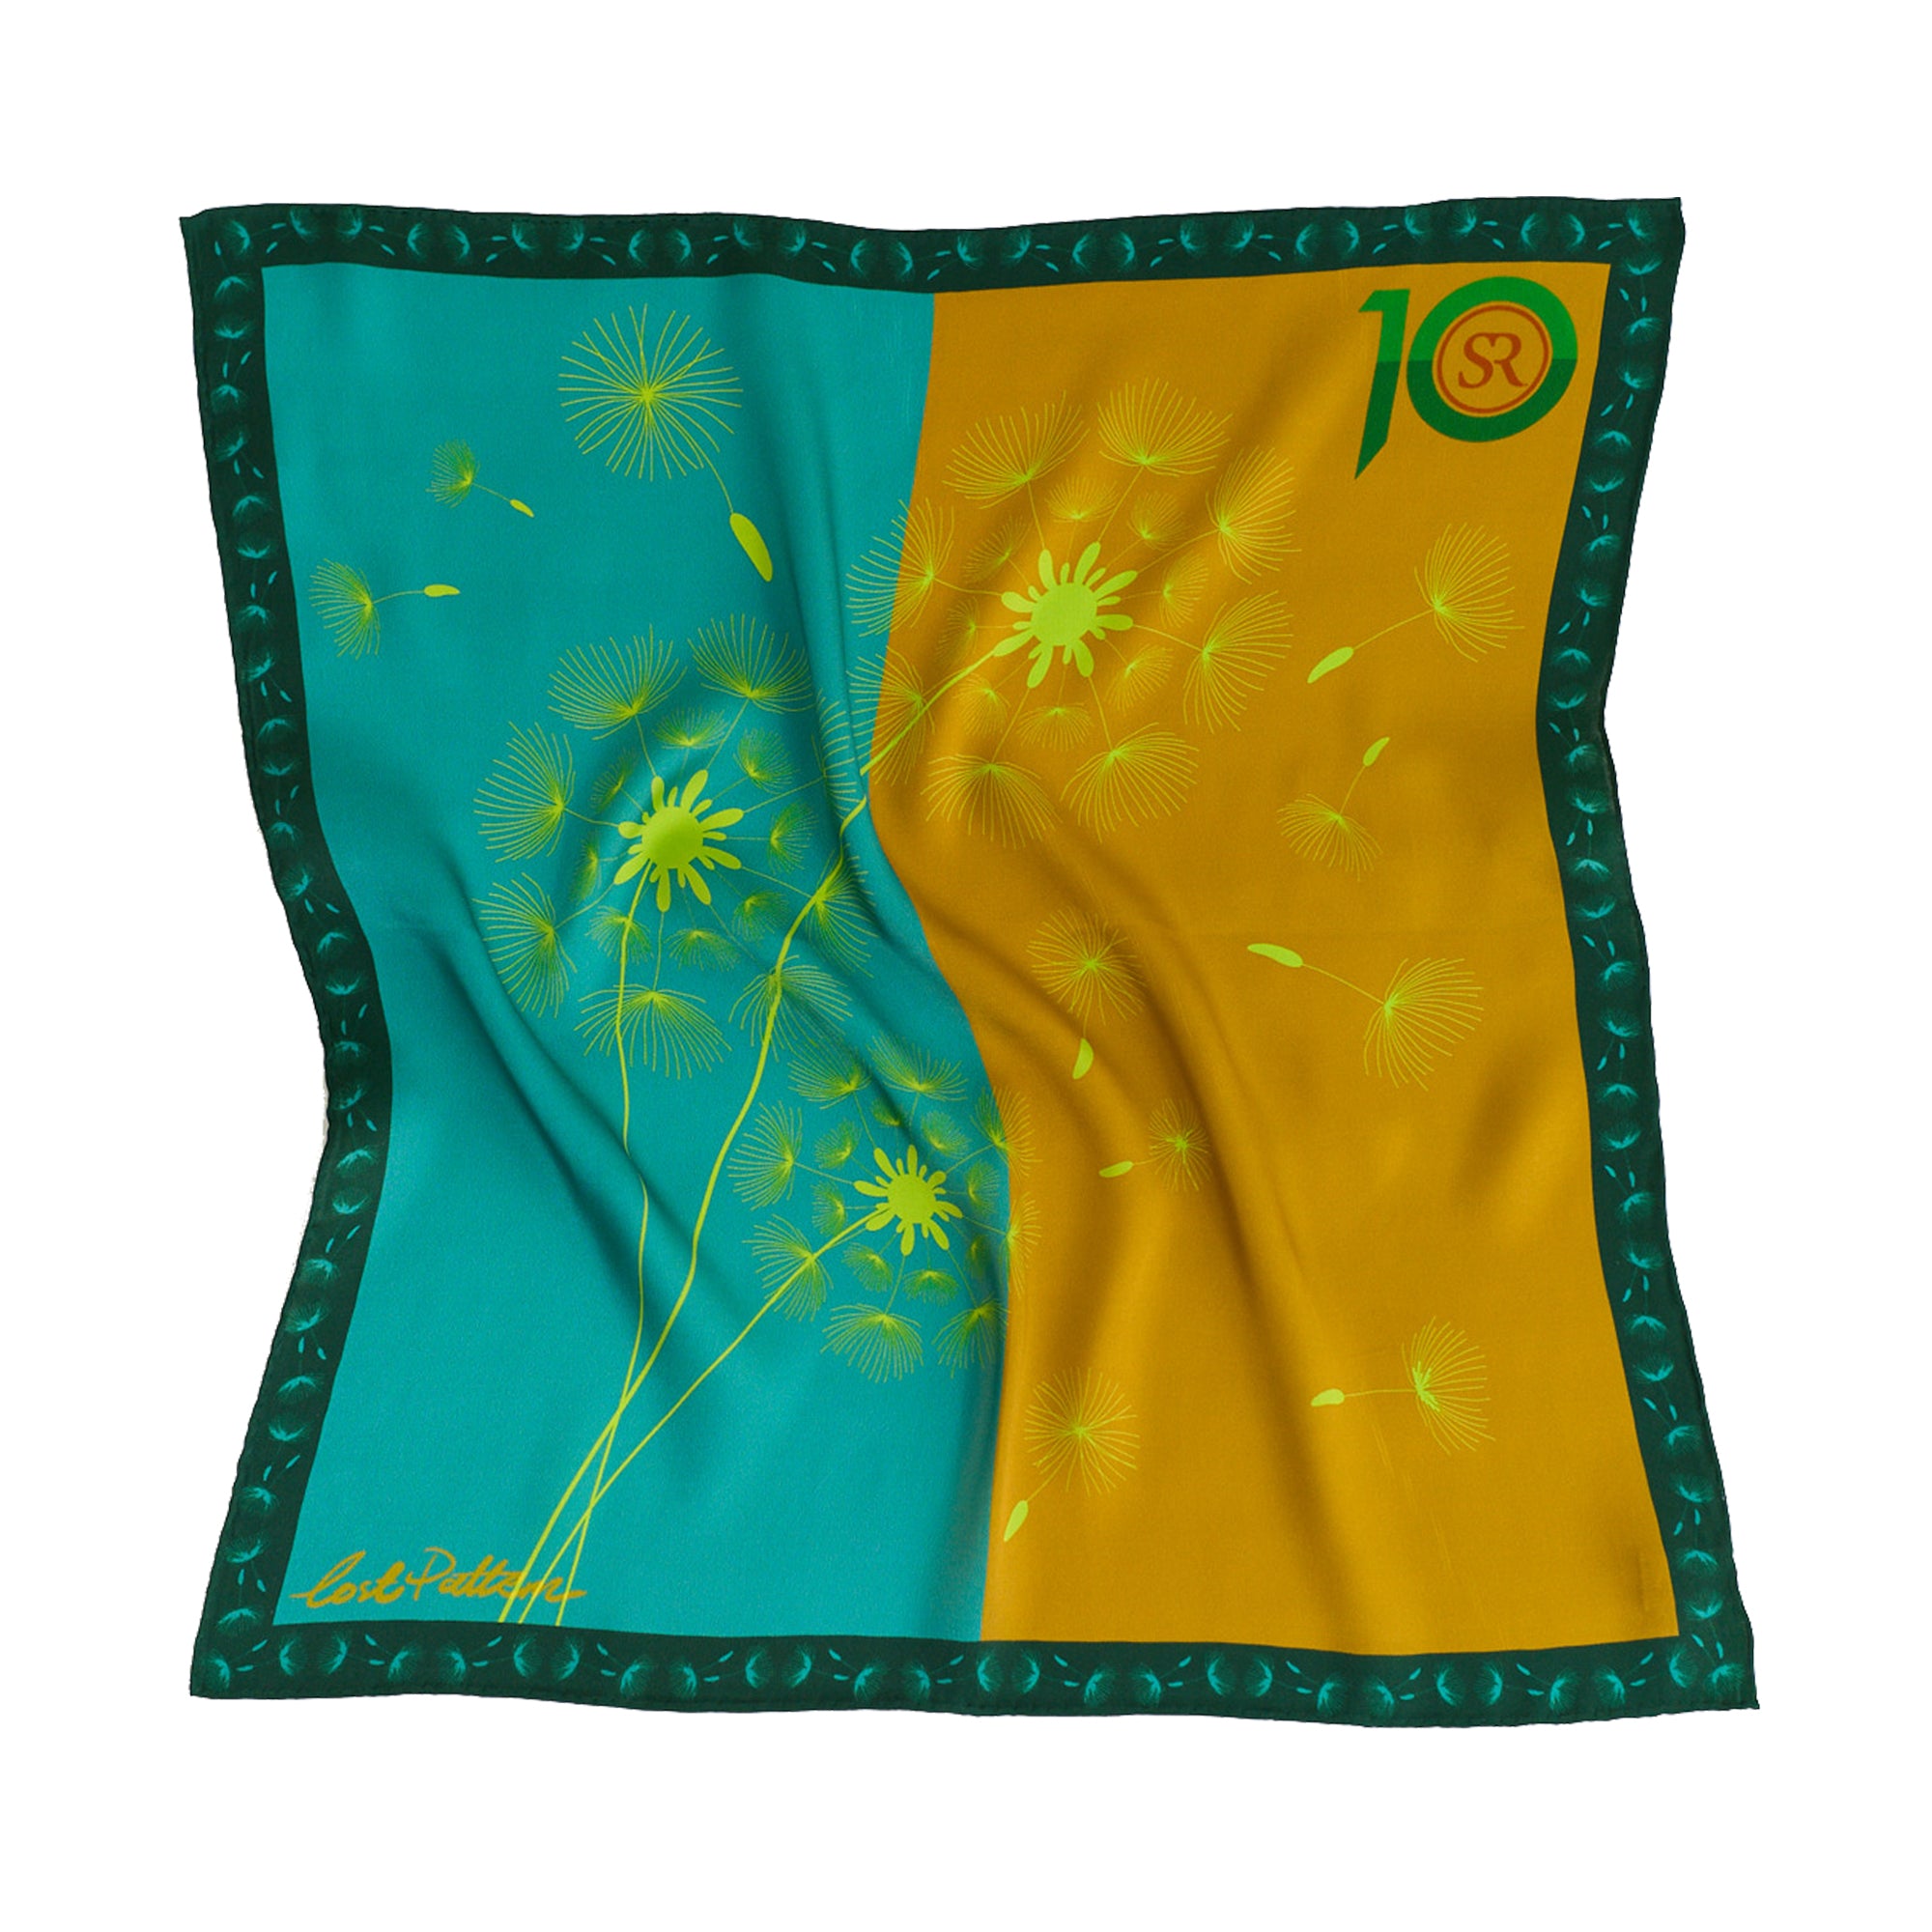 "The Trophy" Silk Scarf for Socially Relevant Film Festival NY - Green & Yellow - LOST PATTERN Silk Square Scarf